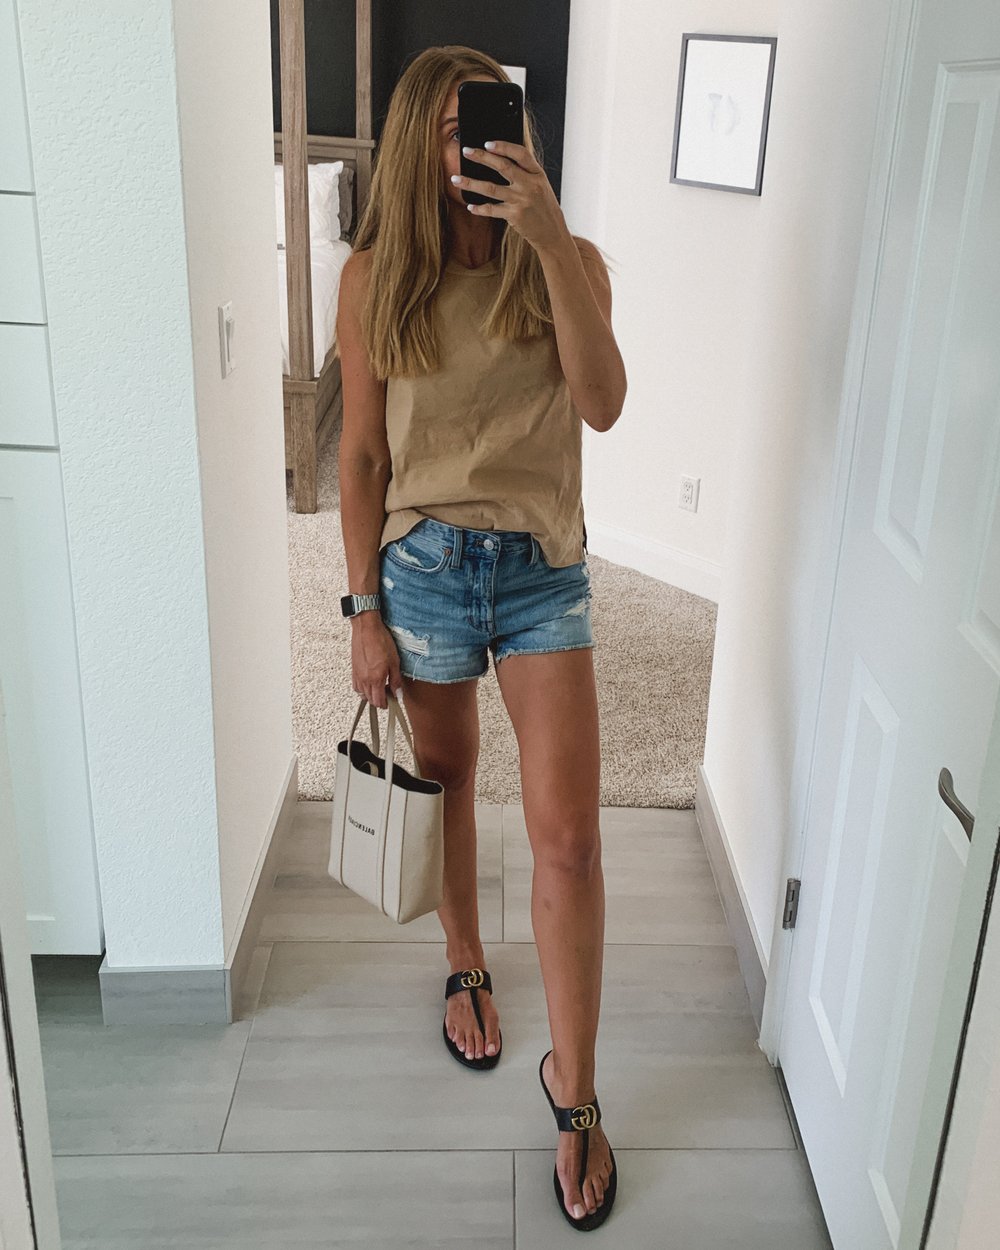  Jessica Ashley wearing Gucci Marmont Sandal outfit with denim shorts, neutral linen tank with Balenciaga bucket bag crossbody | outfit inspiration summer outfit 